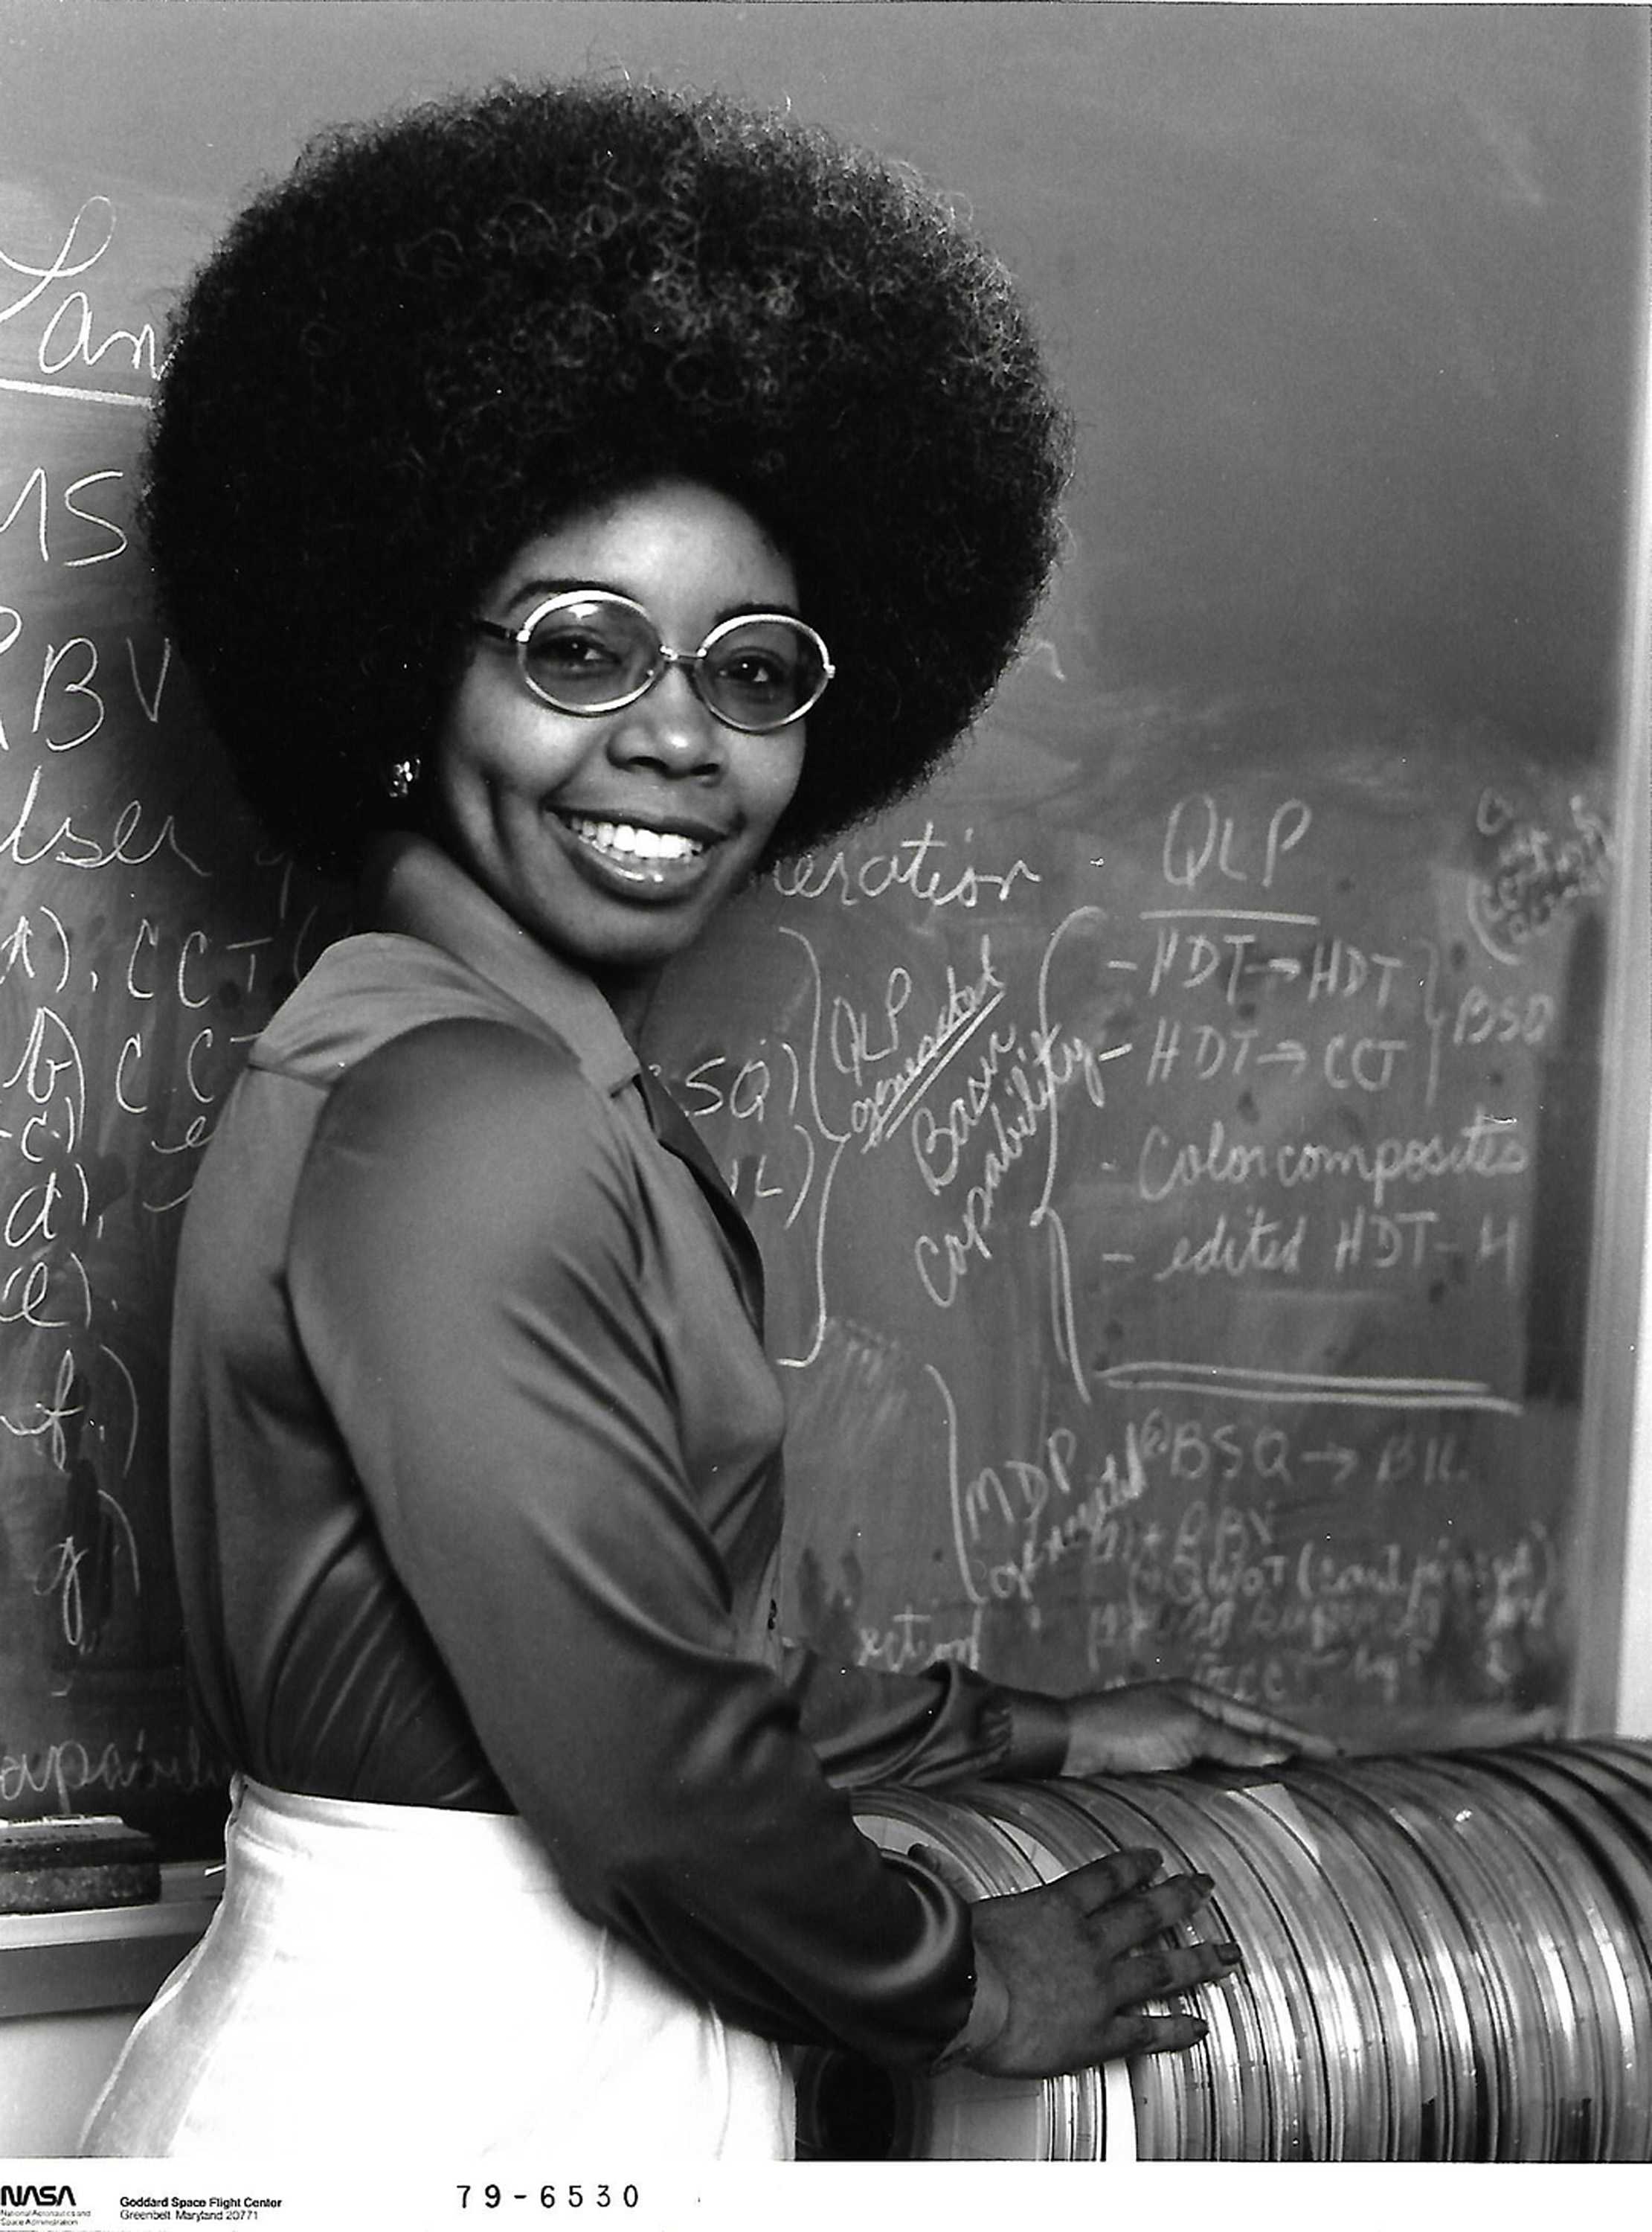 Valerie Thomas is smiling as she poses for a black and white photo in front of a chalkboard with writing on it.